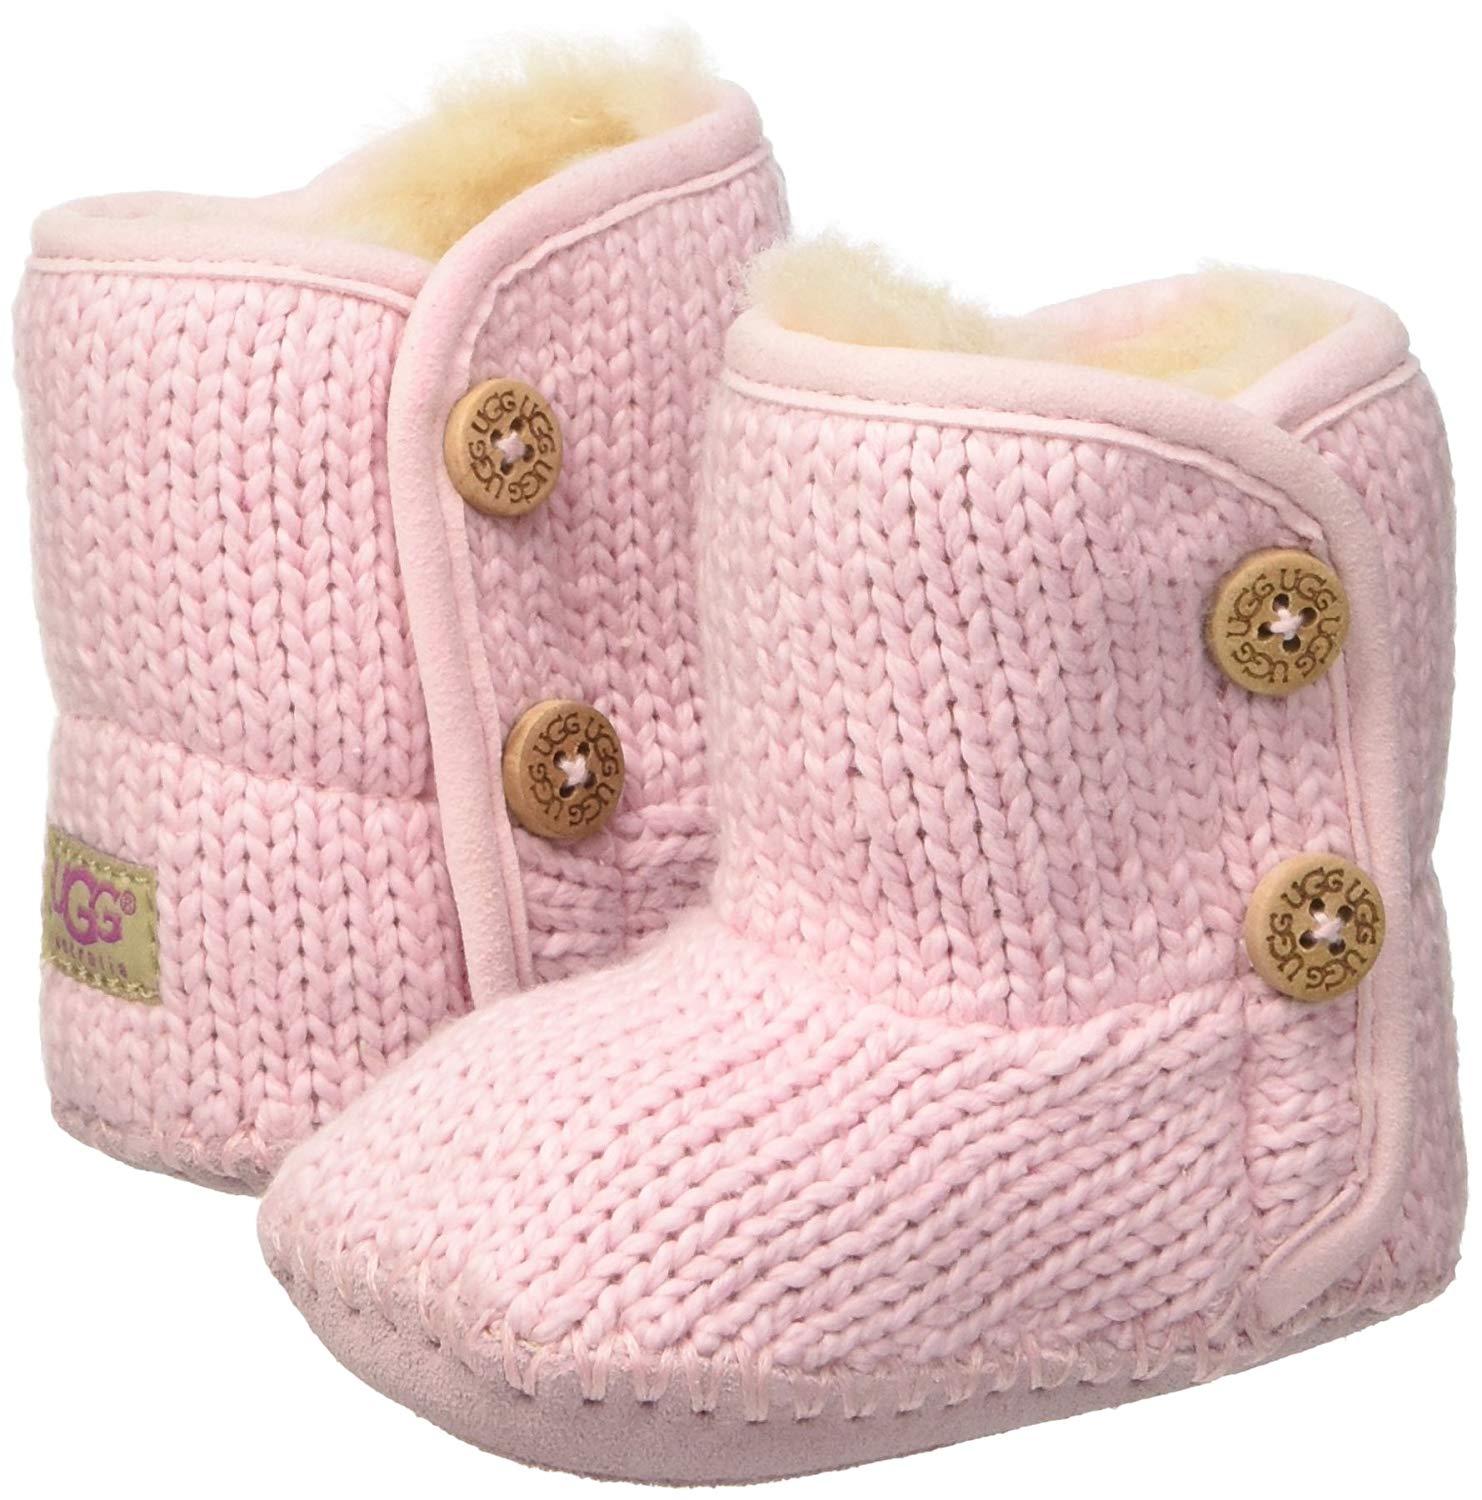 ugg baby winter boots